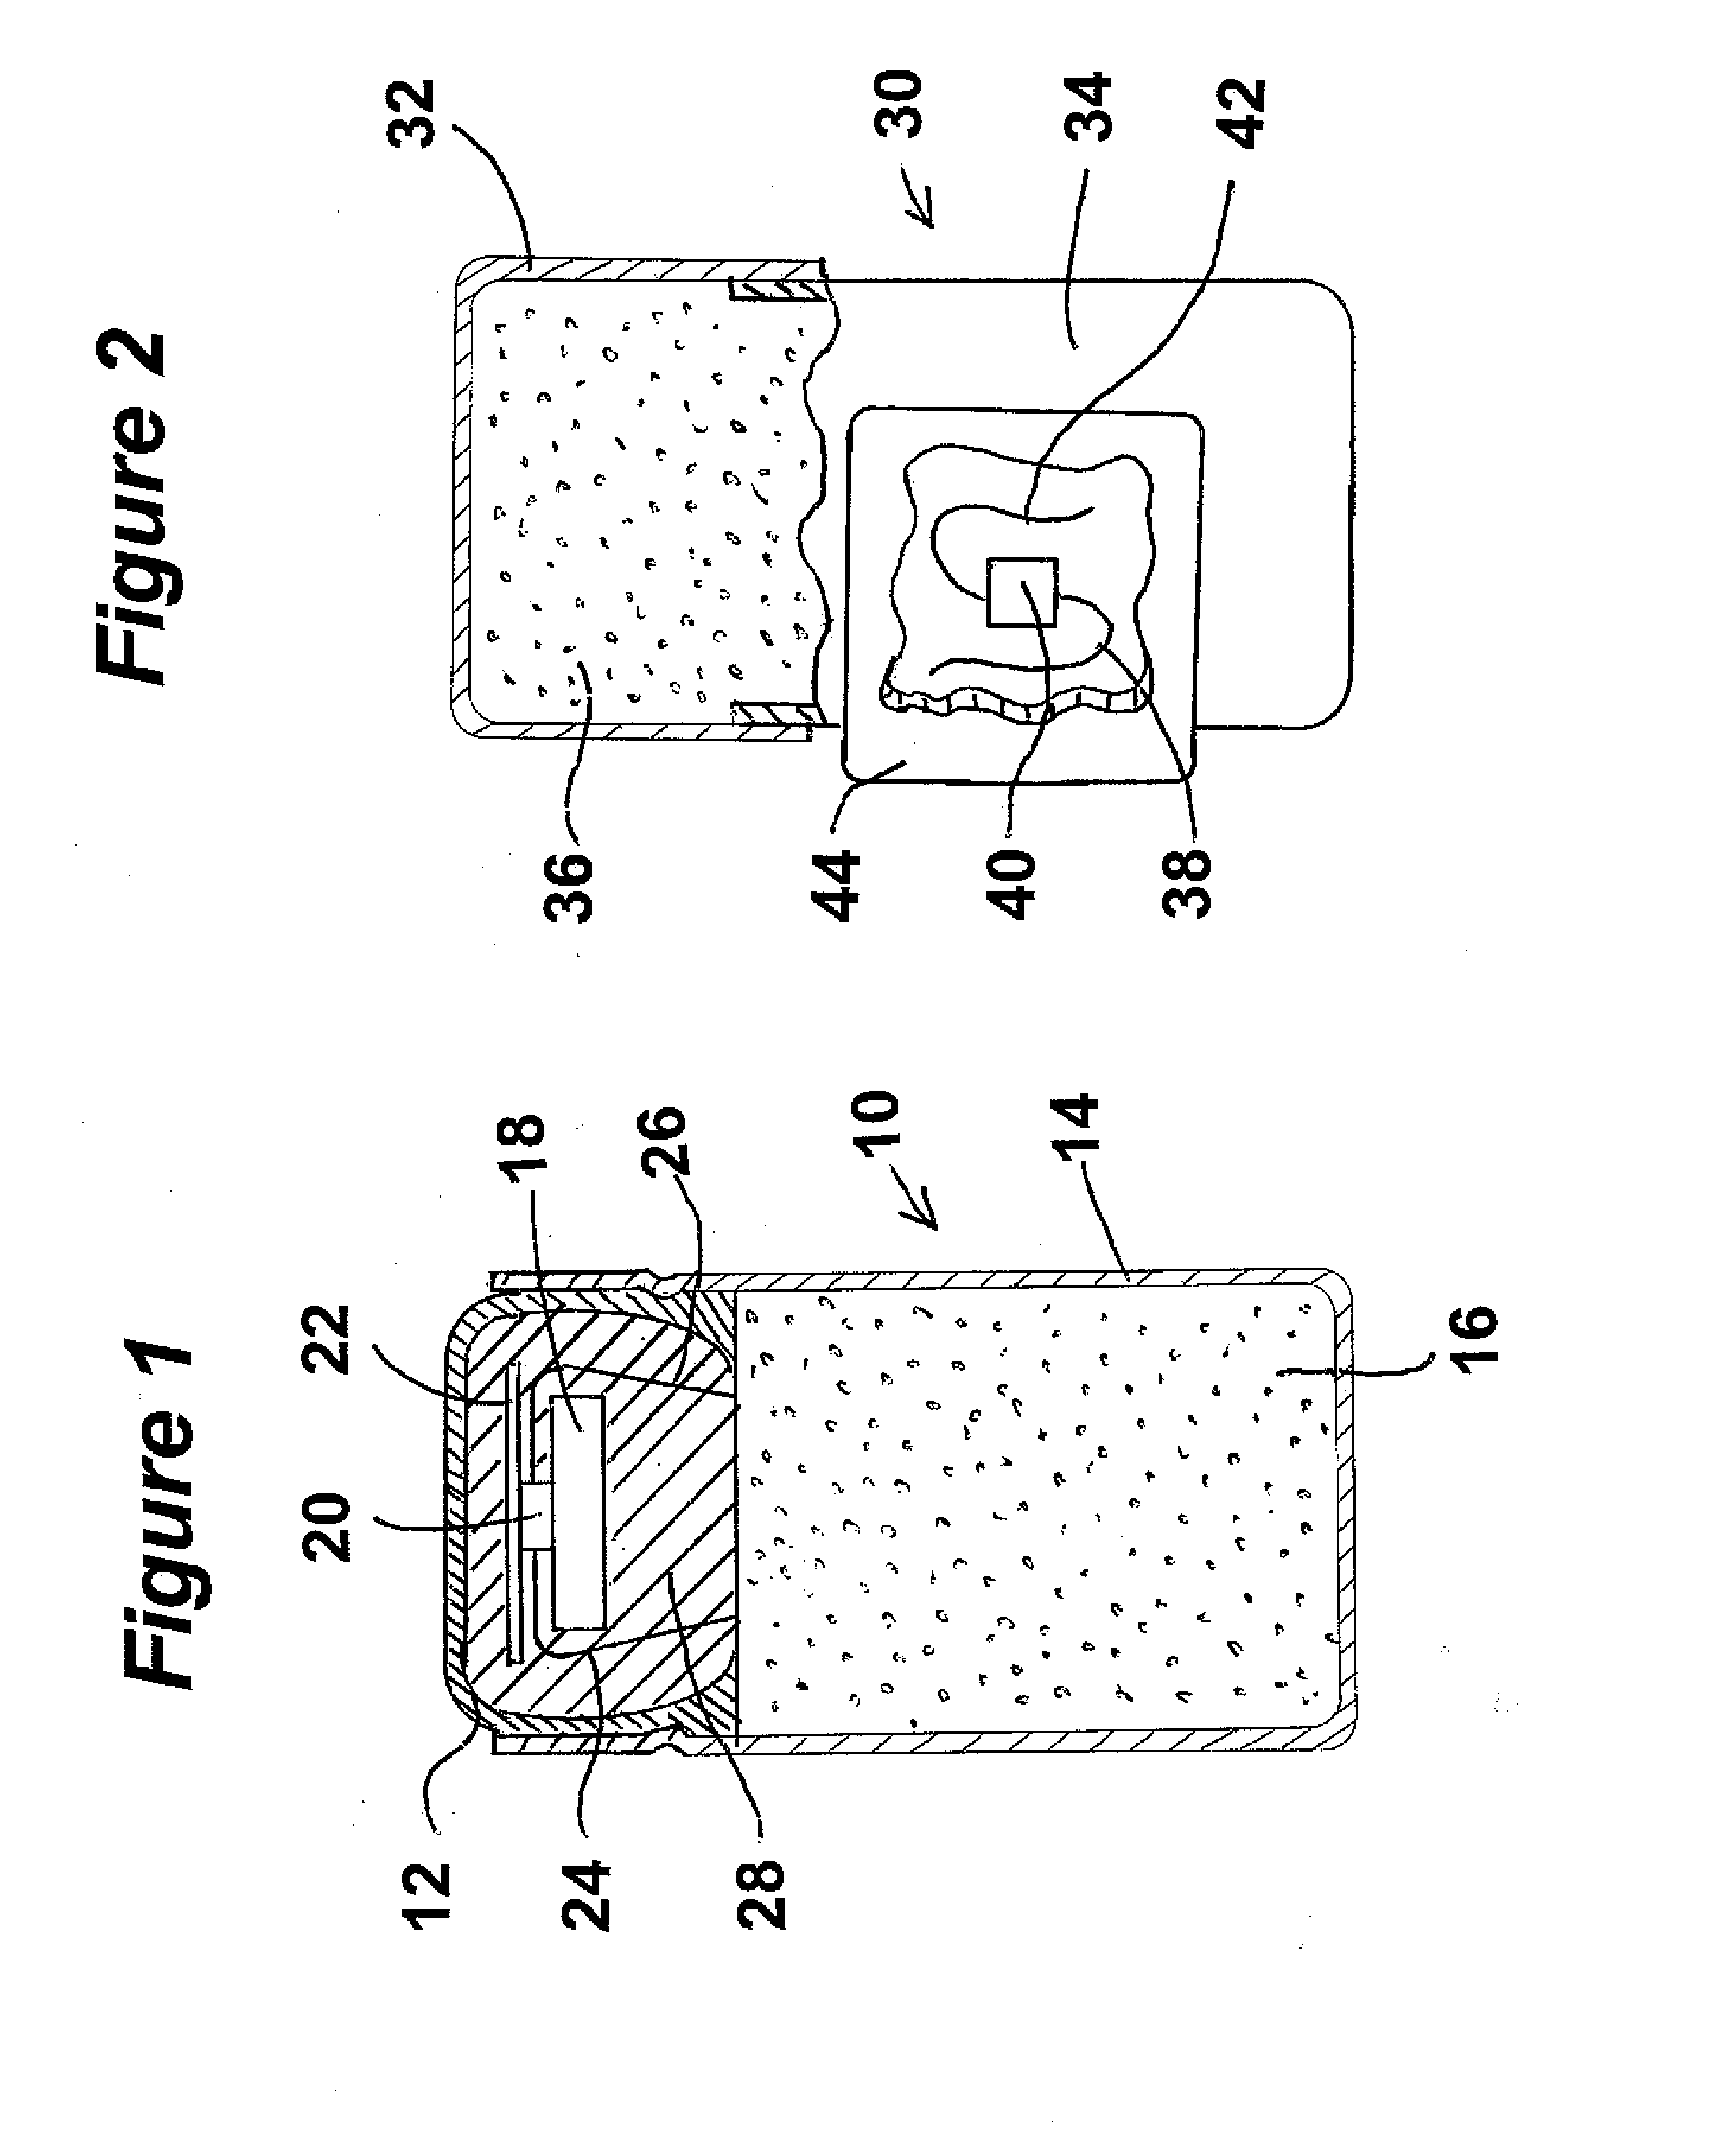 Oral drug capsule component incorporating a communication device